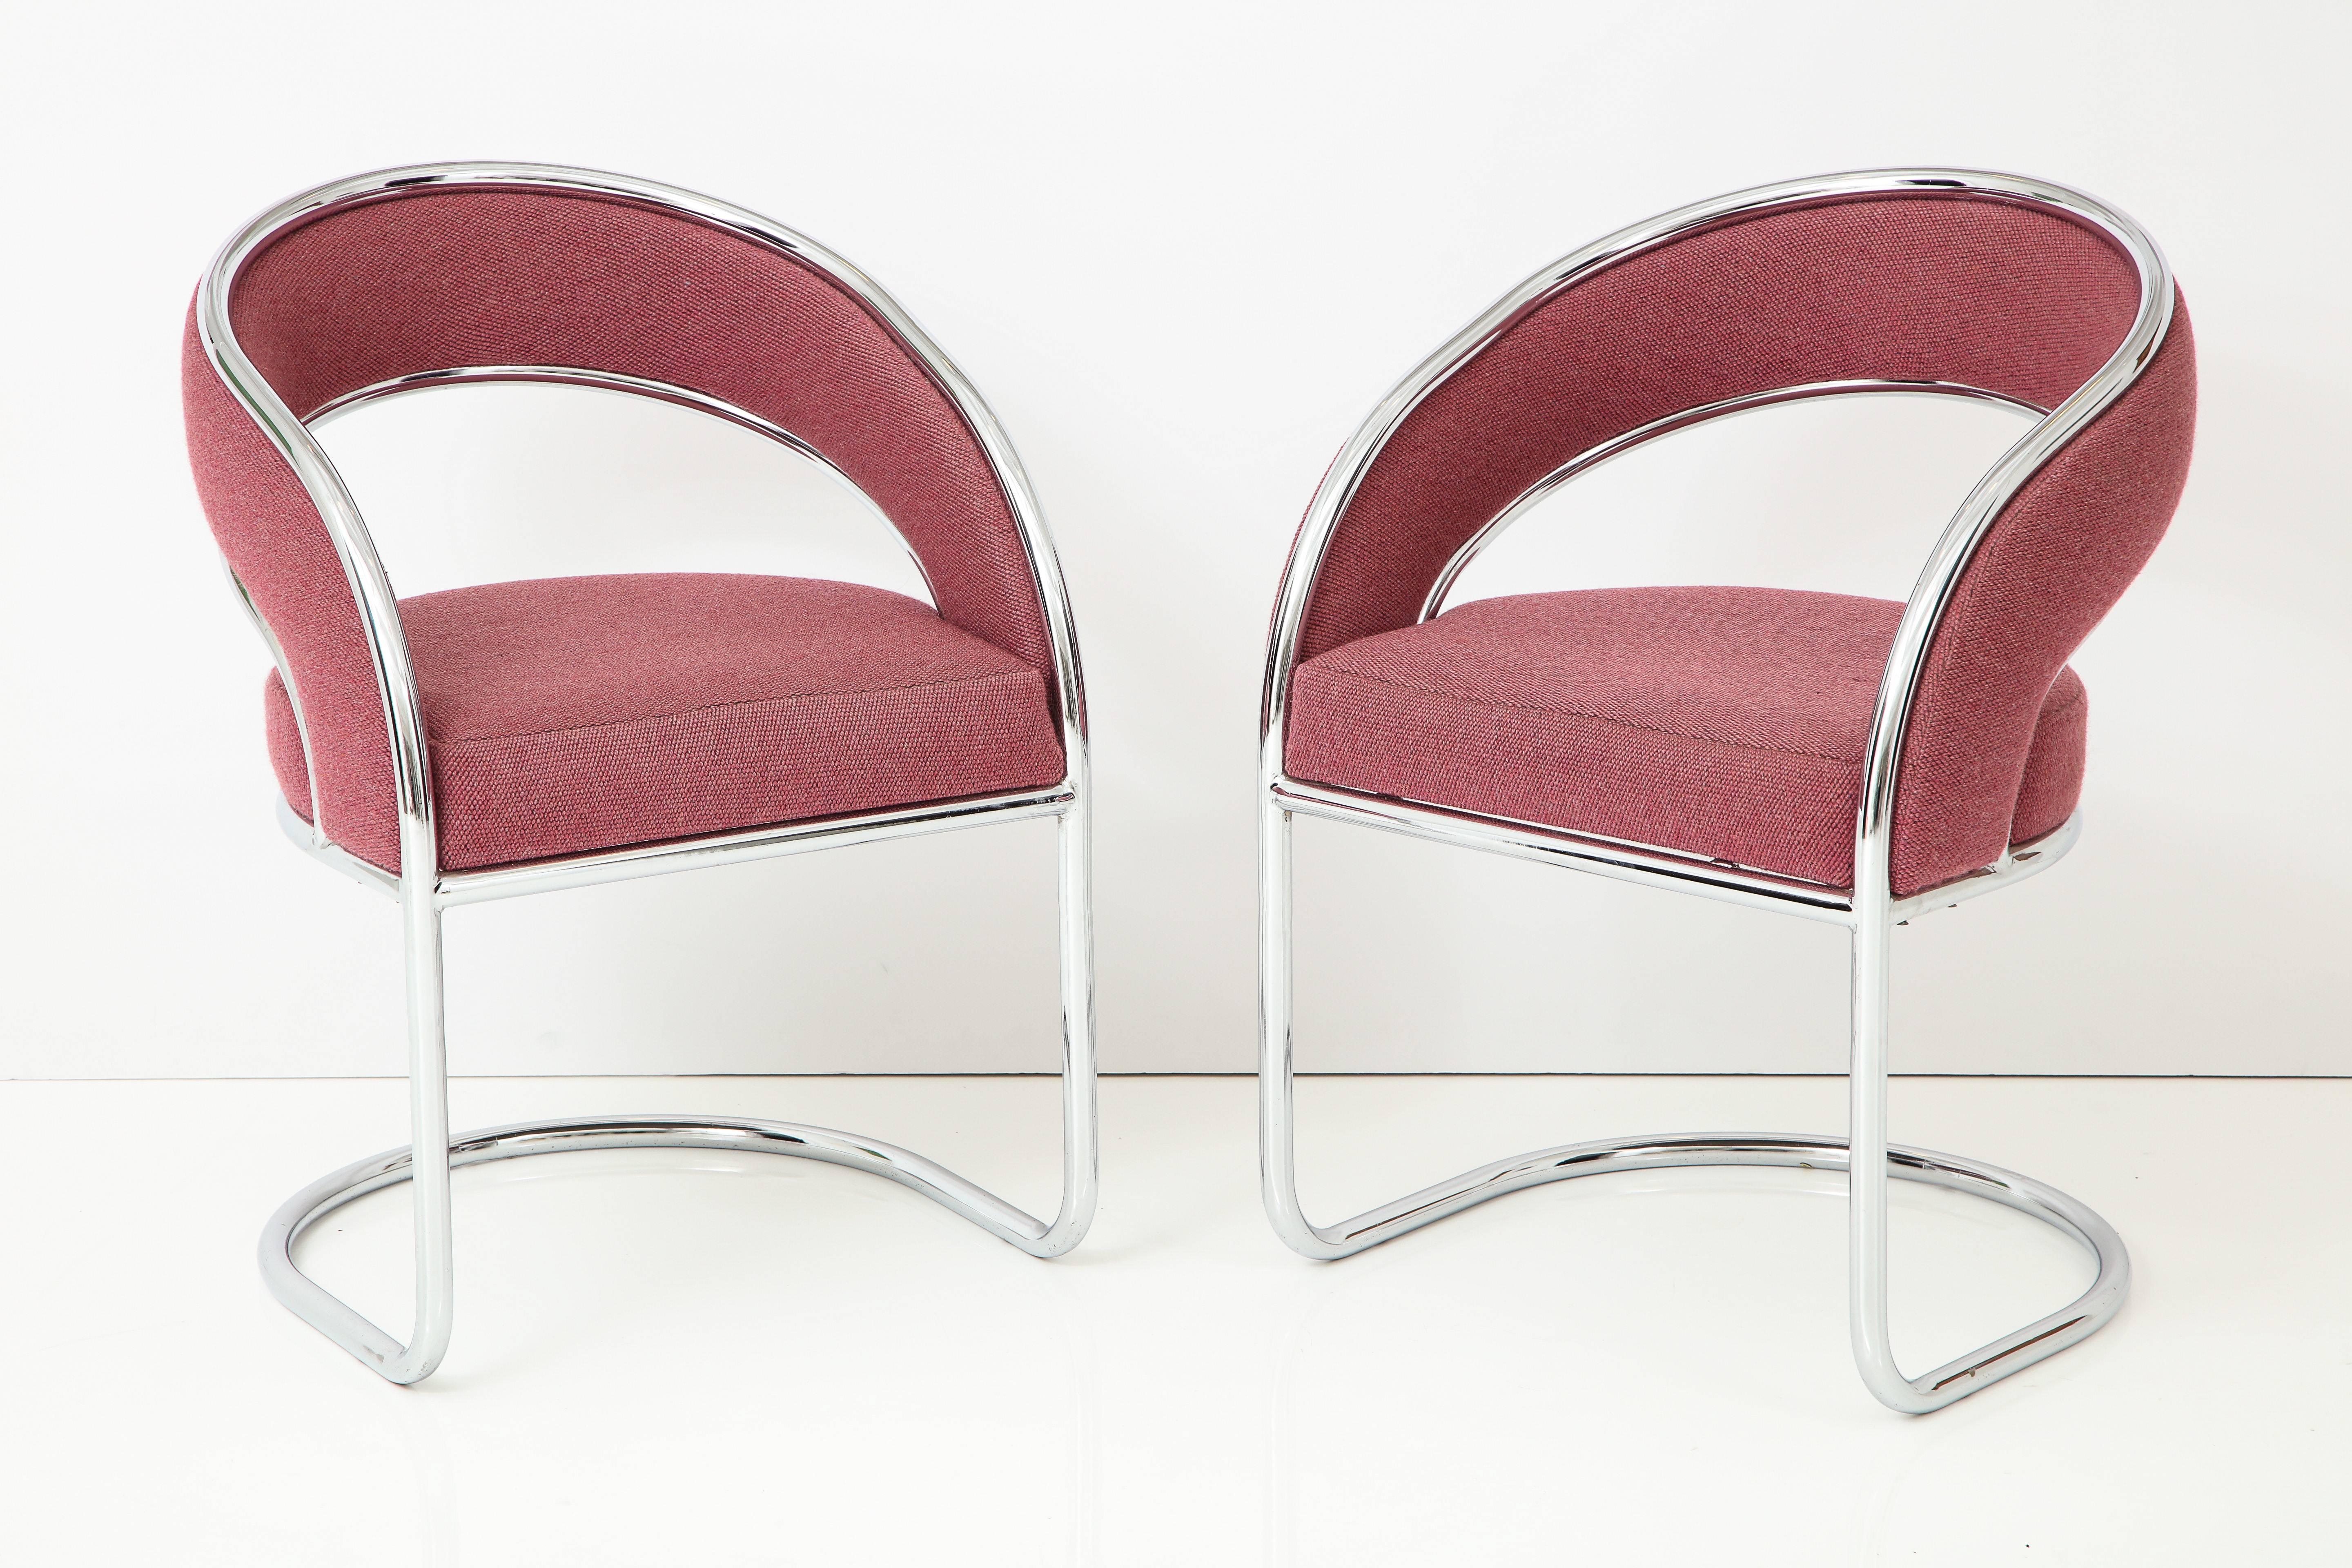 A Classic pair of 1970s chrome cantilever armchairs; upholstered in original mauve wool cotton.
American, circa 1970
Size: 31 1/2